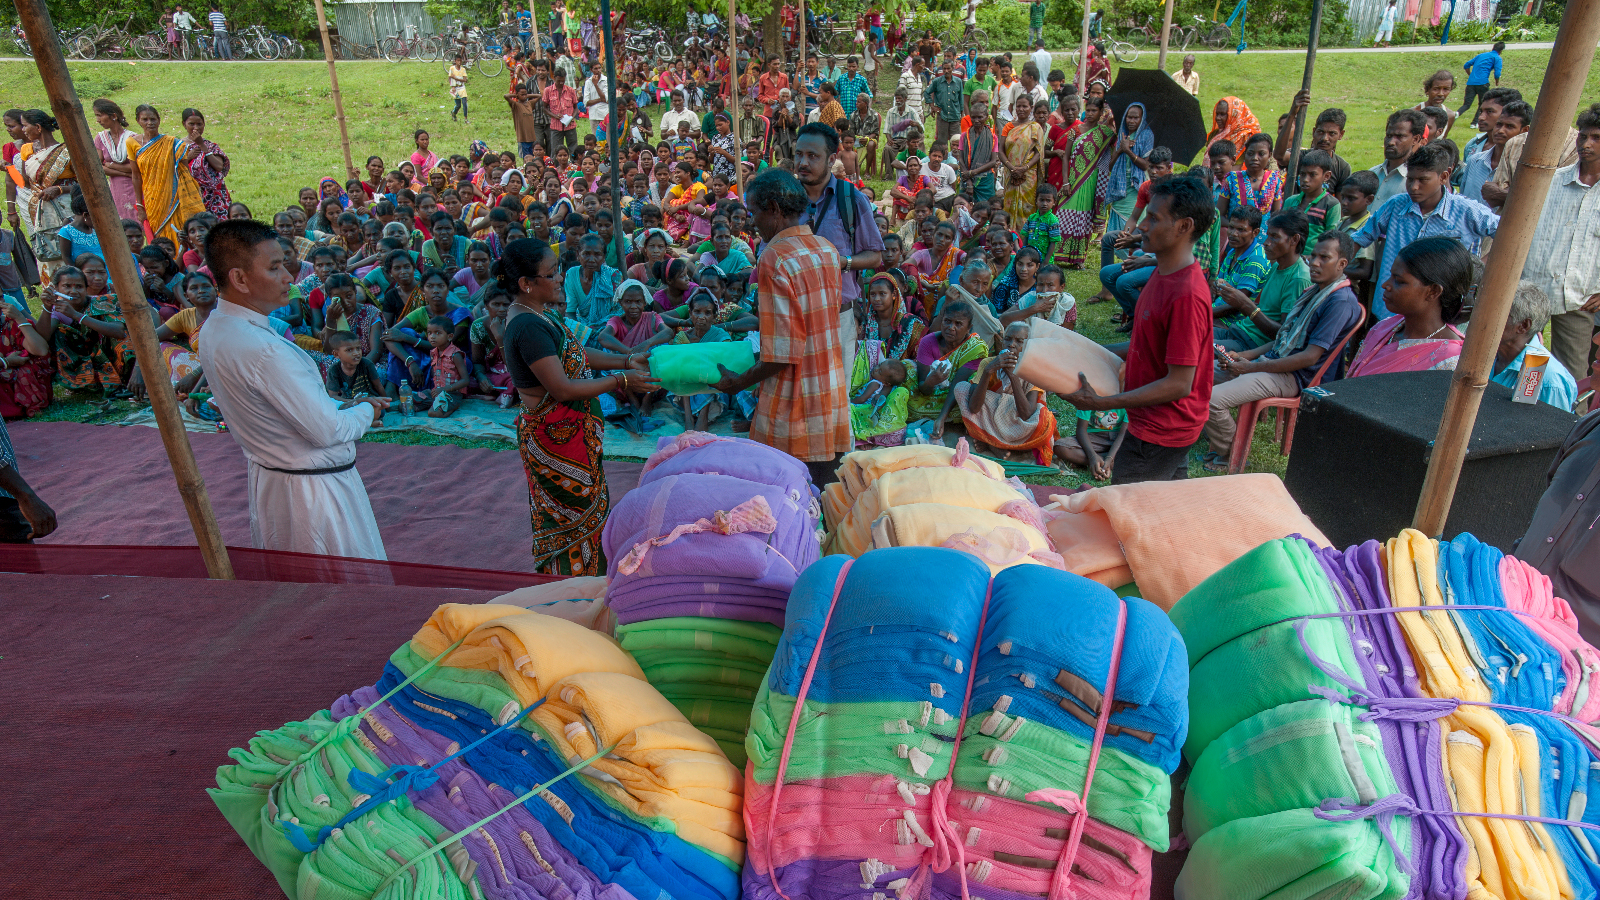 Local Believers Eastern Church distributed over eight hundred mosquito nets to villagers from economically poor backgrounds.